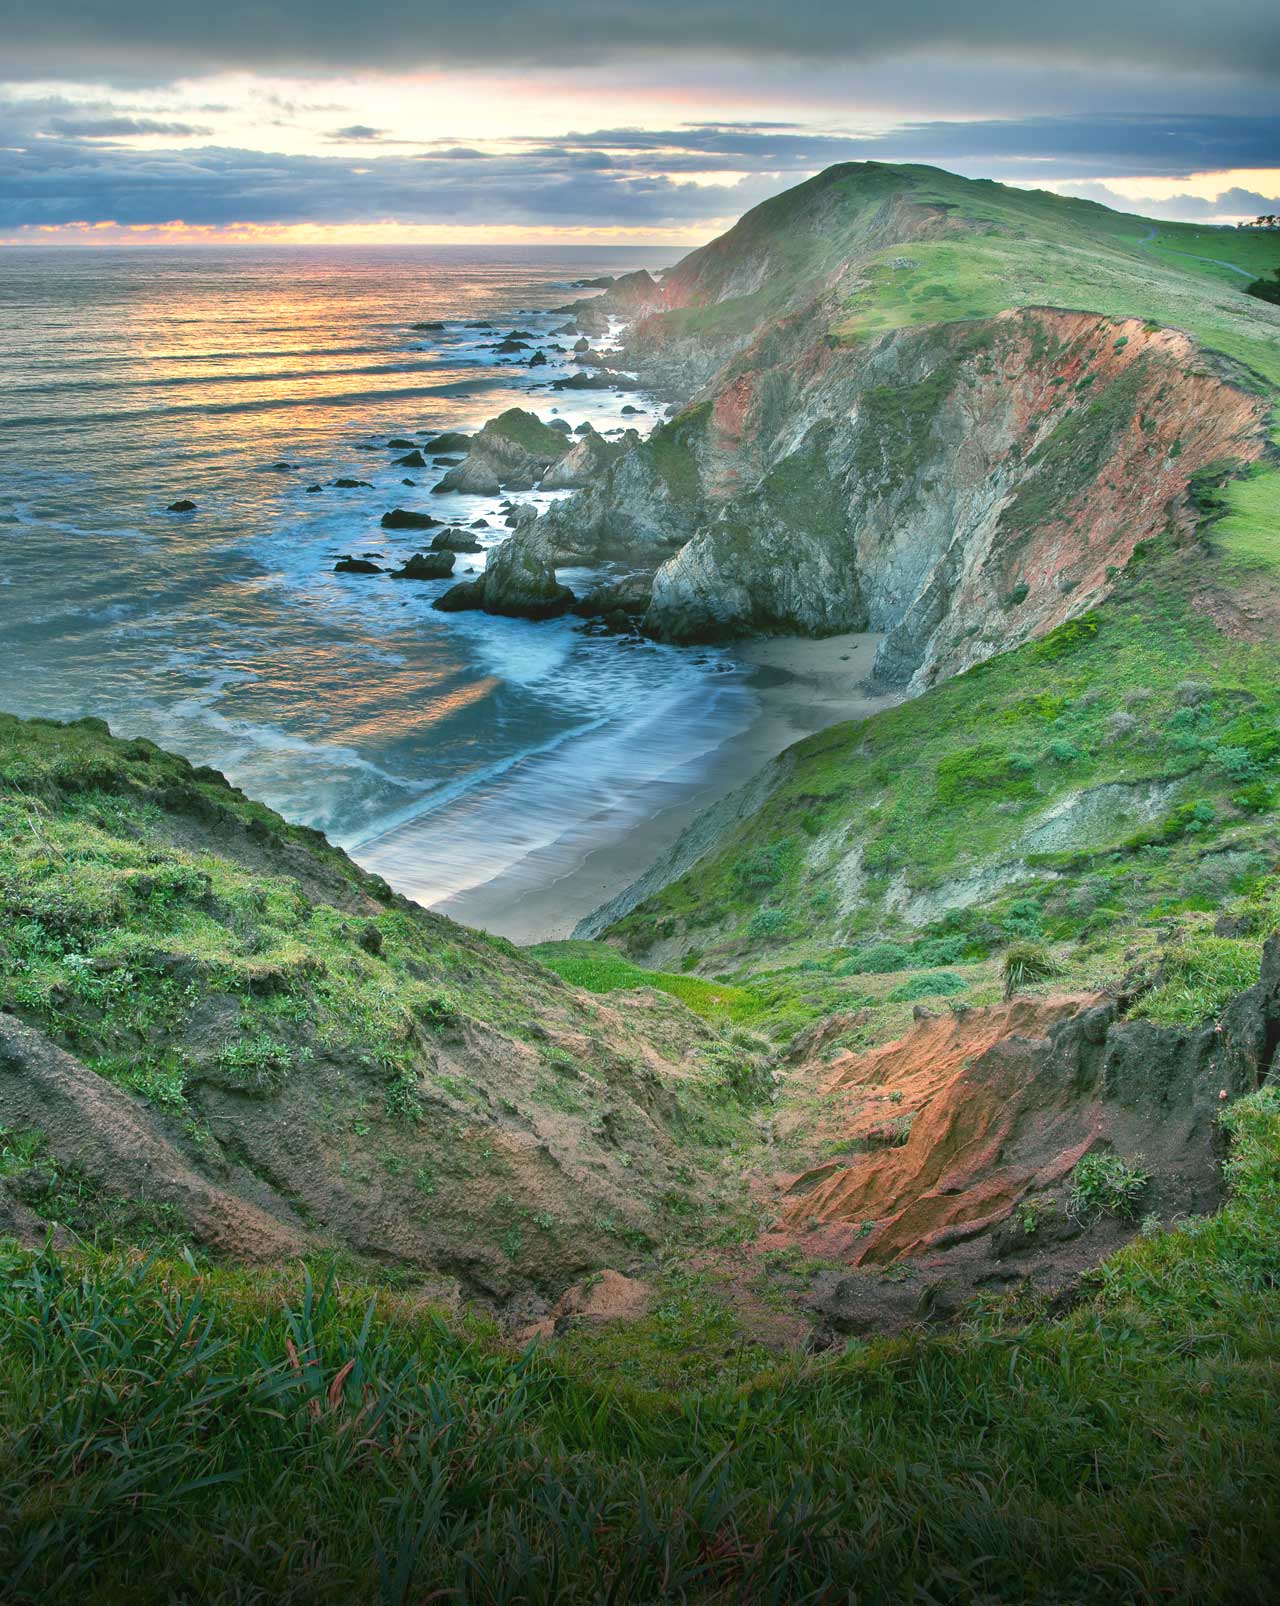 Explore the Beautiful Beaches of the Point Reyes National Seashore